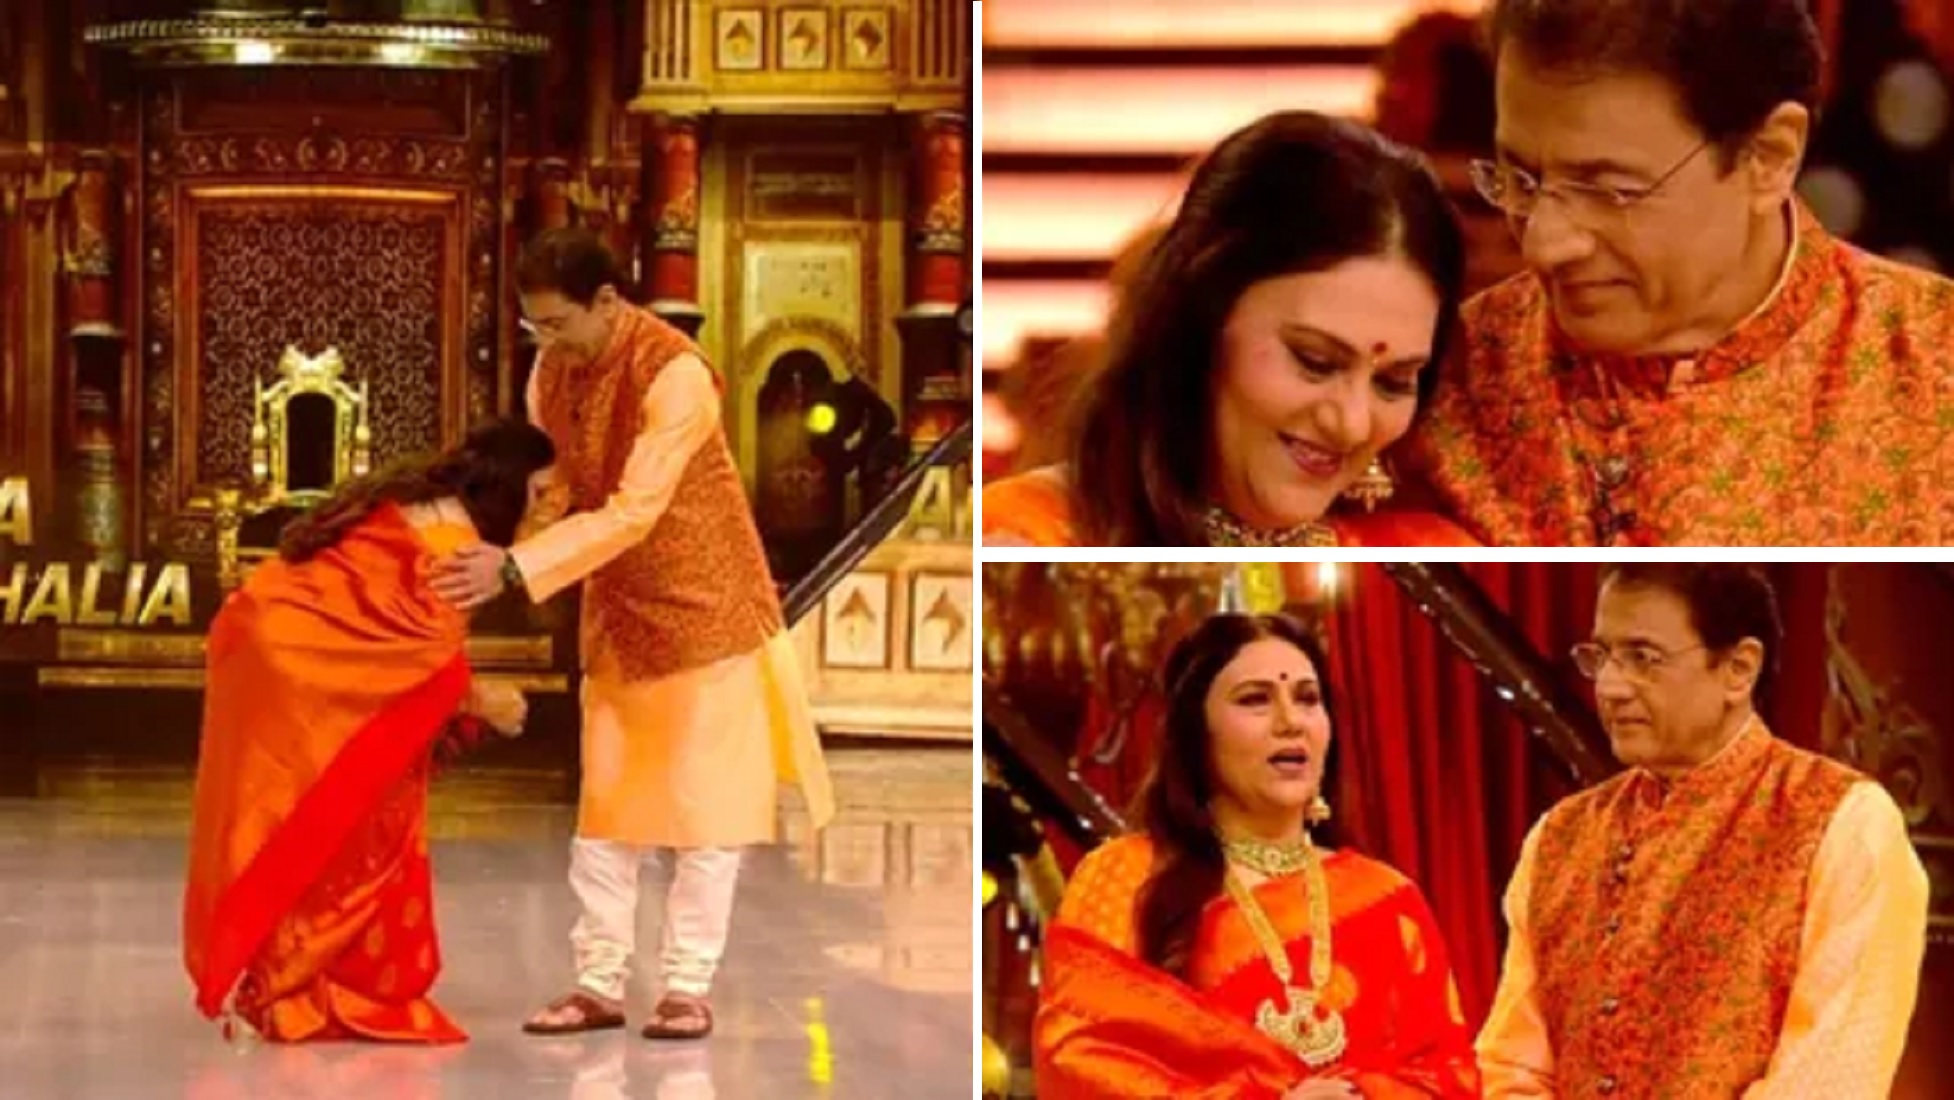 Ramayan Legends: Dipika Chikhlia Touches Arun Govil’s Feet, Recreating Iconic Scene As Goddess Sita And Lord Ram